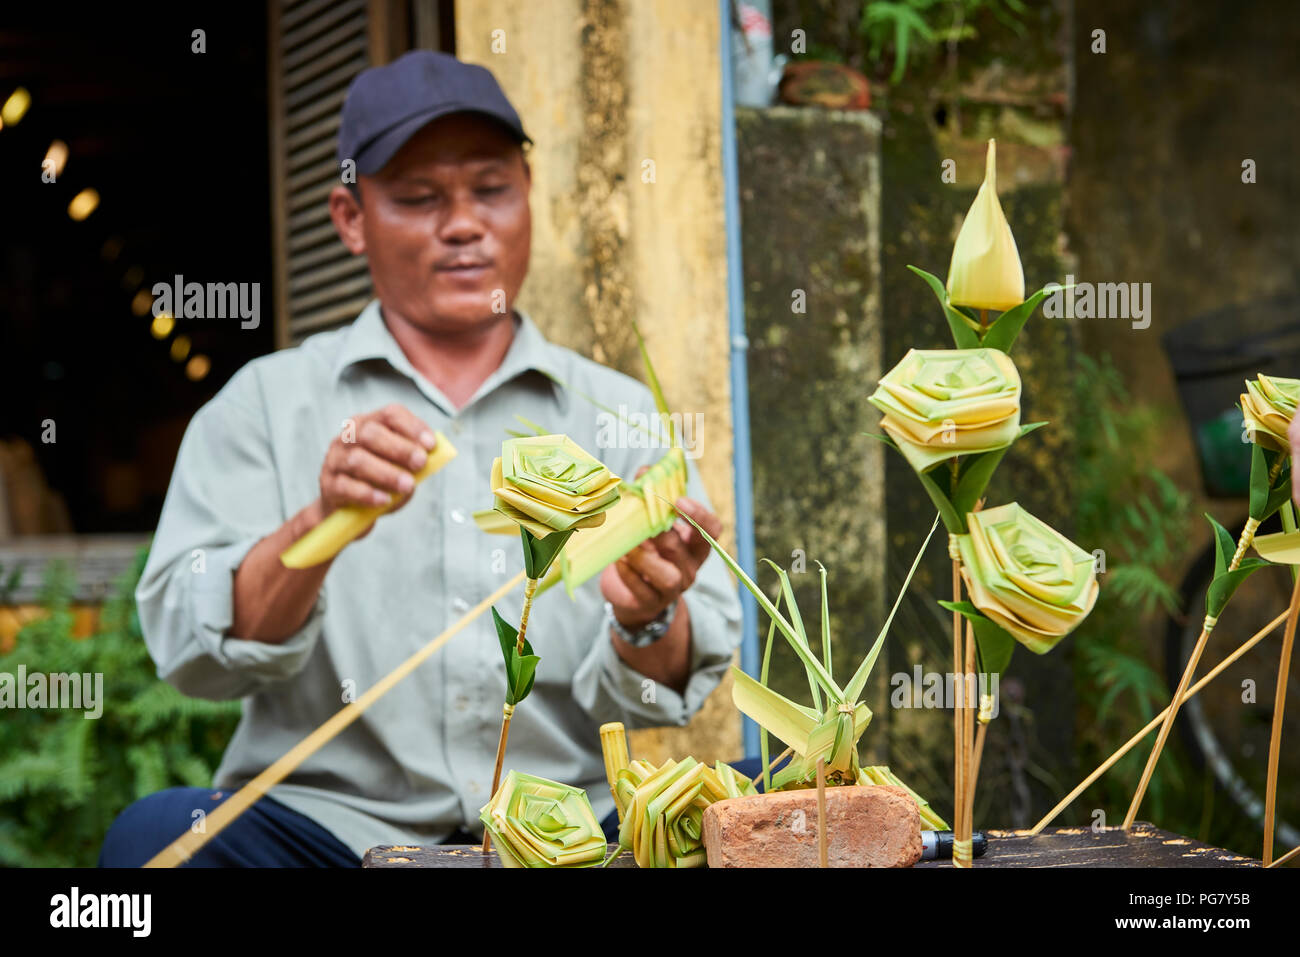 A talented street artist making and selling palm leaf roses in the streets of Hoi An, Vietnam. Stock Photo